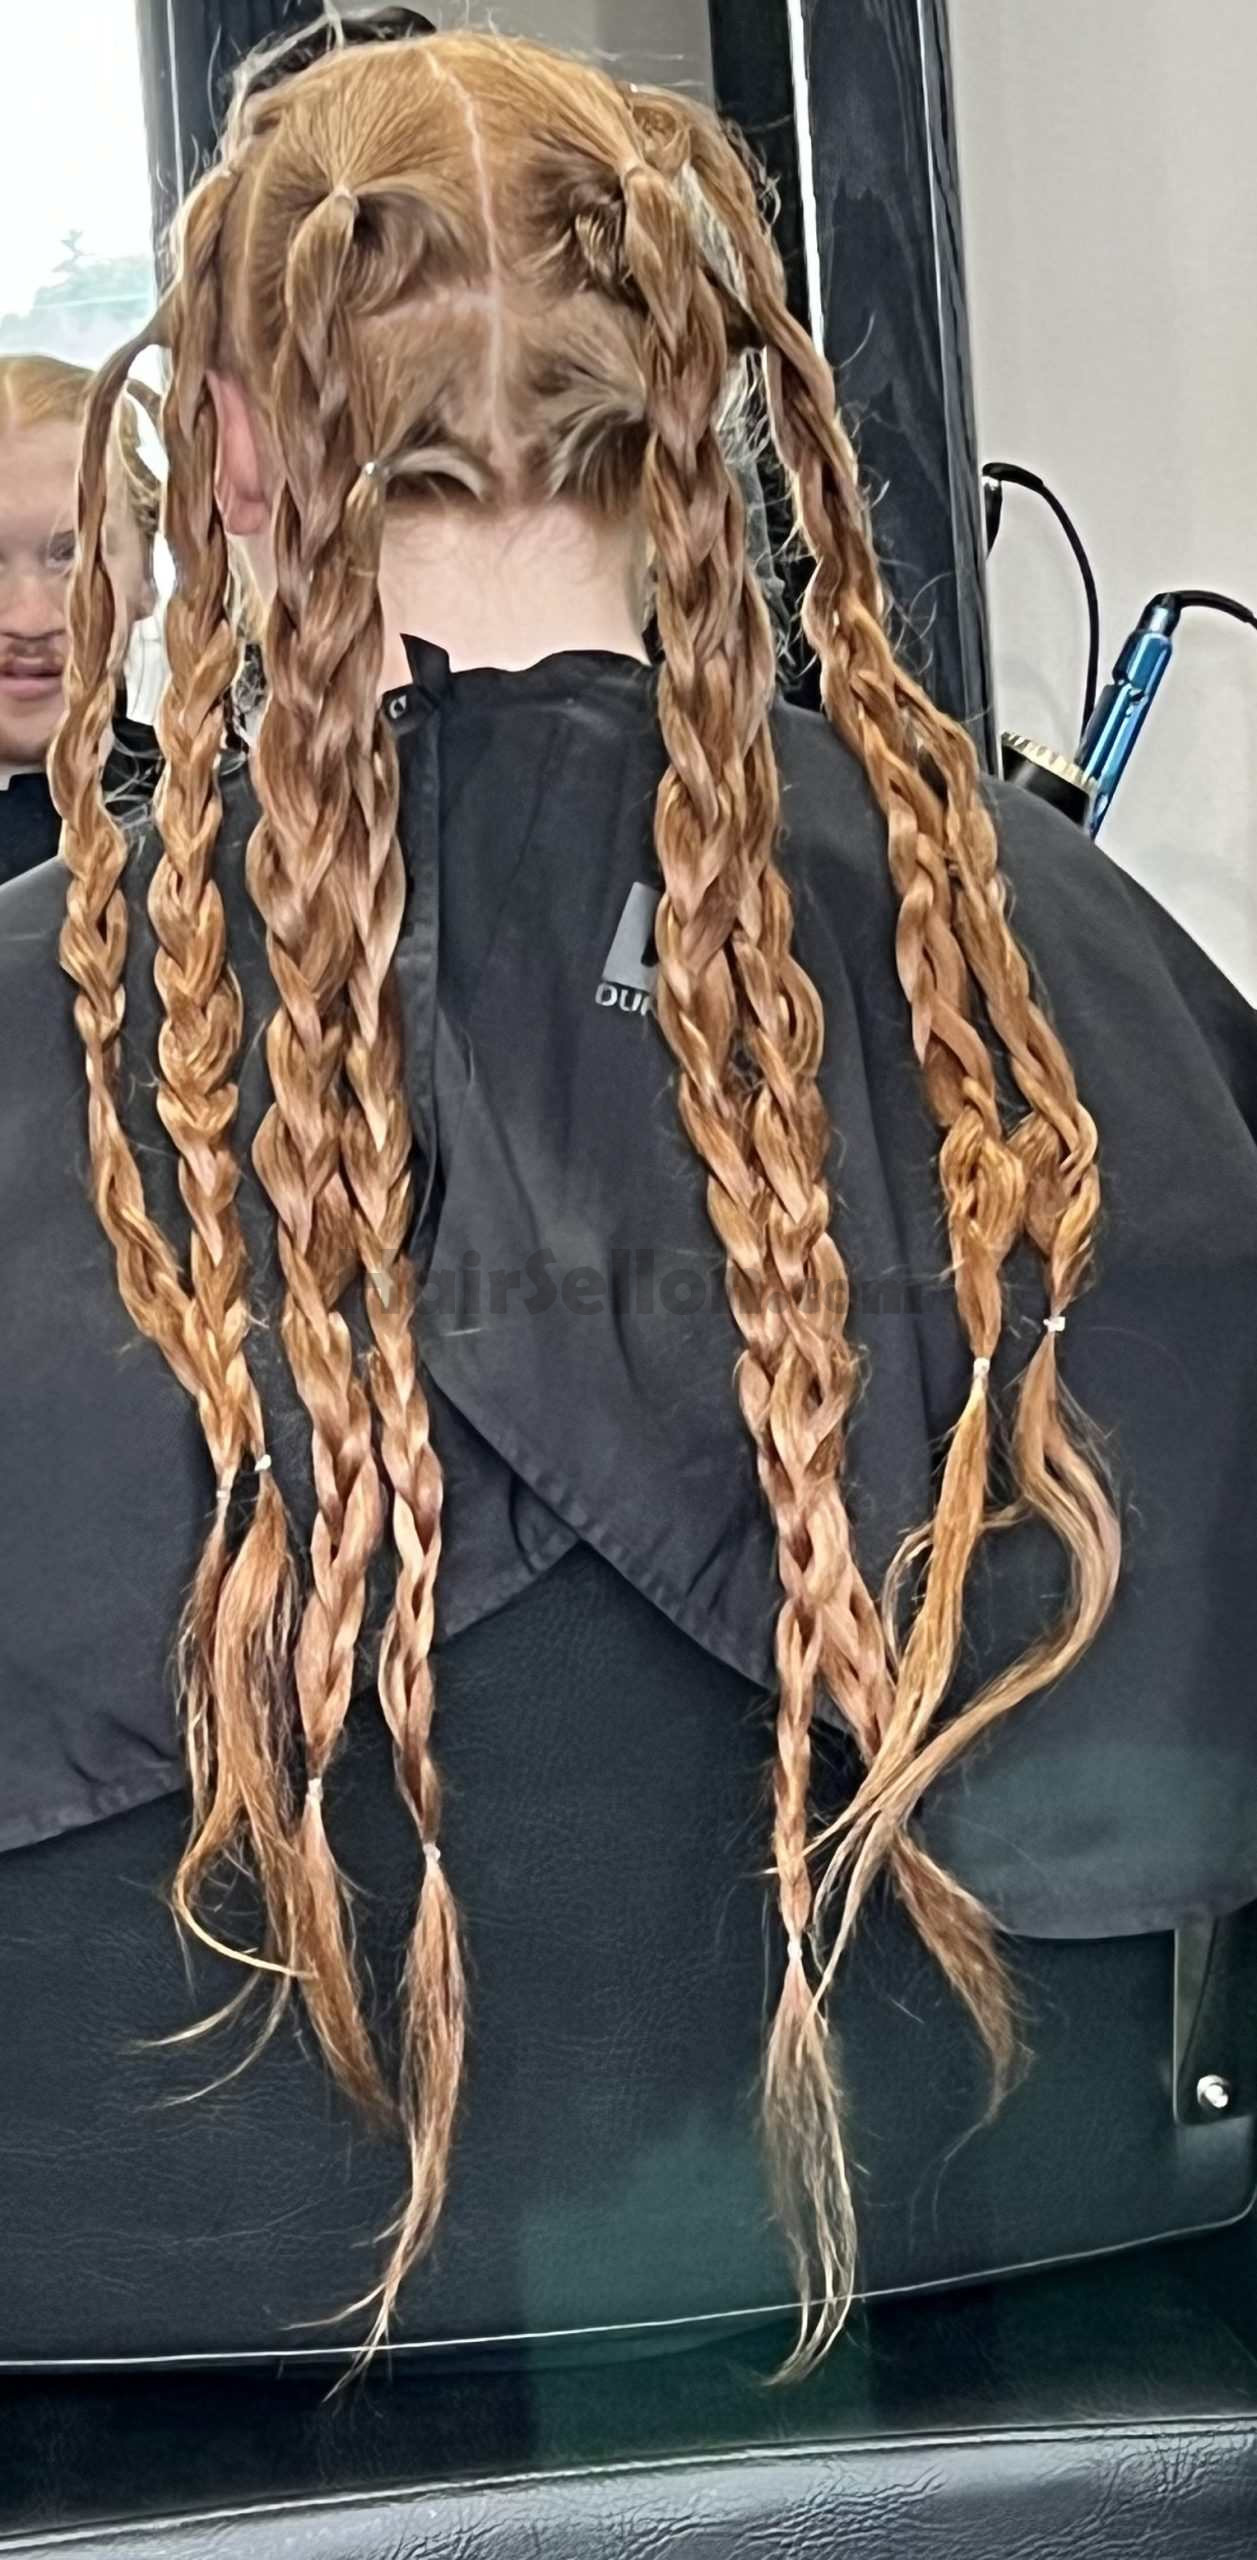 All the braids before cutting